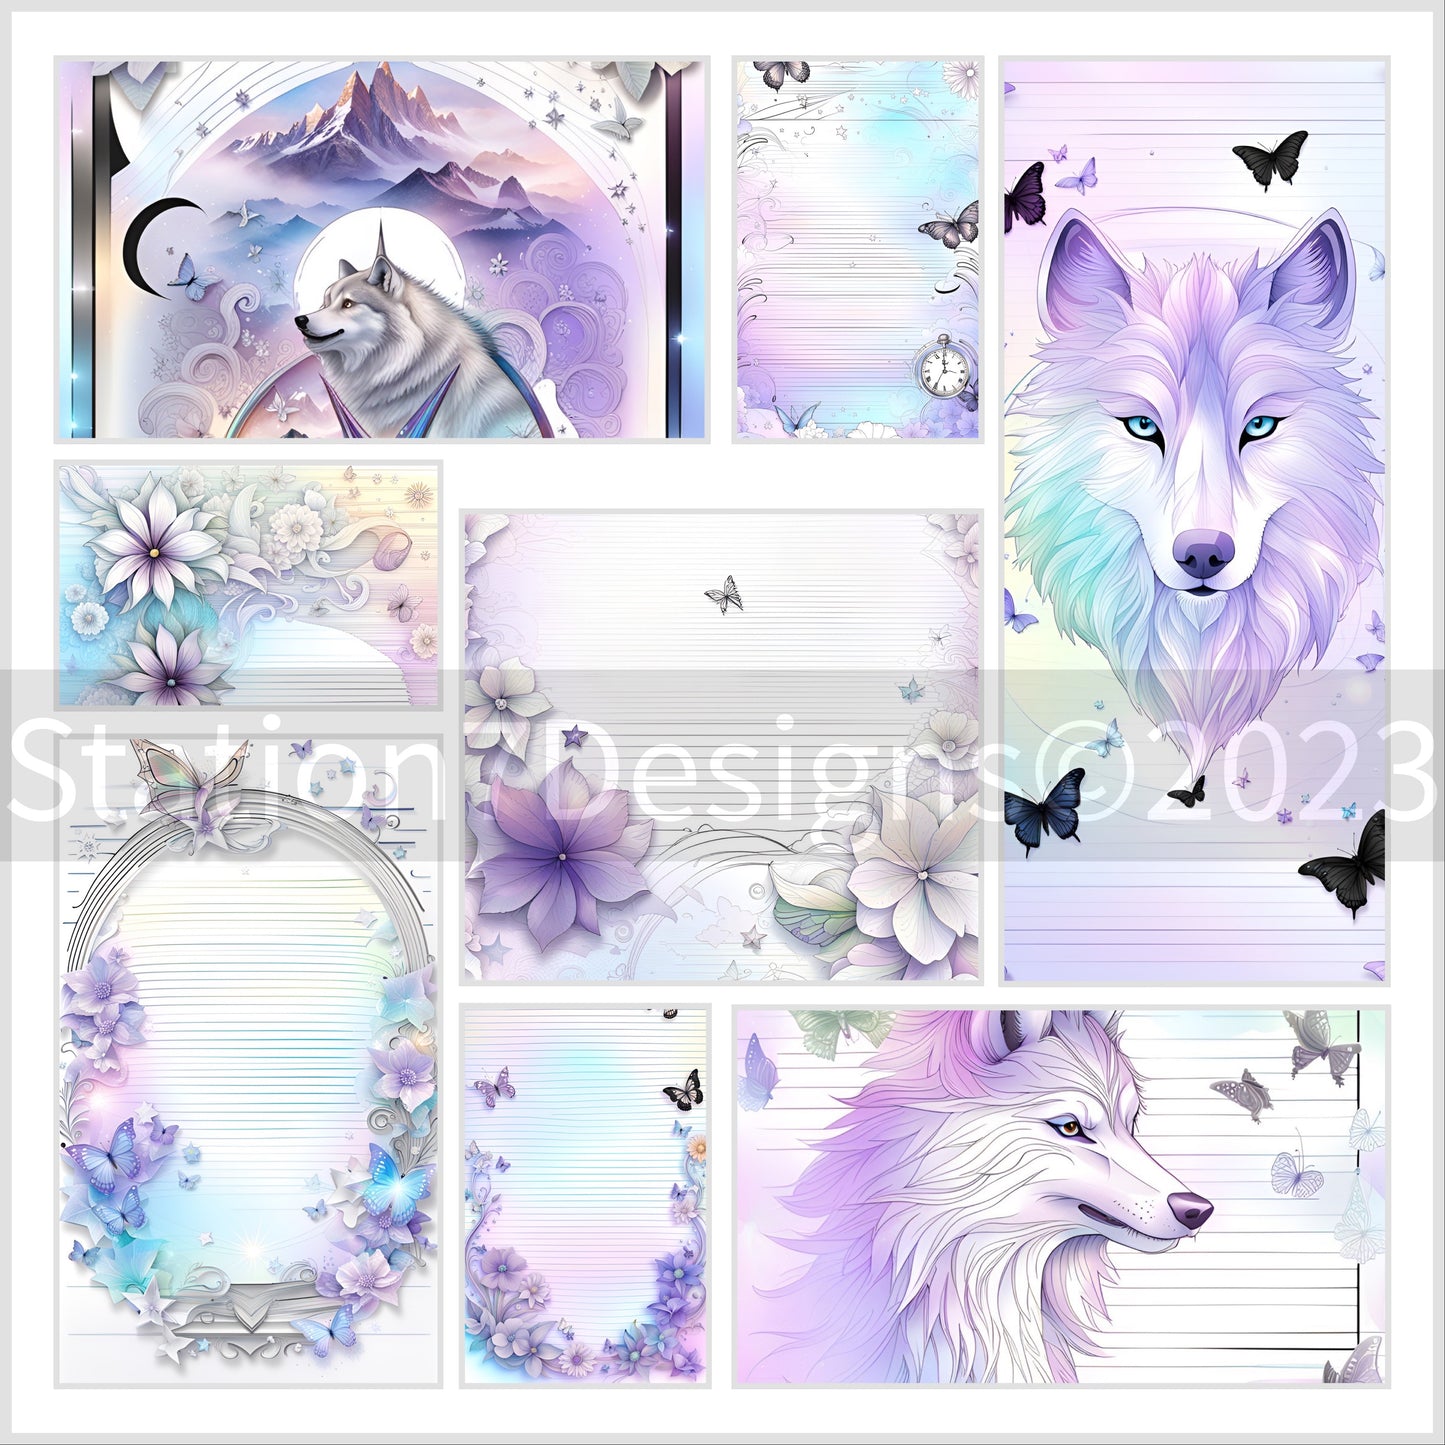 Mystic Lupine: Colorful Wolves Junk Journal Stationery Scrapbooking Print Set Of 9 On Linen Paper Or Card Stock